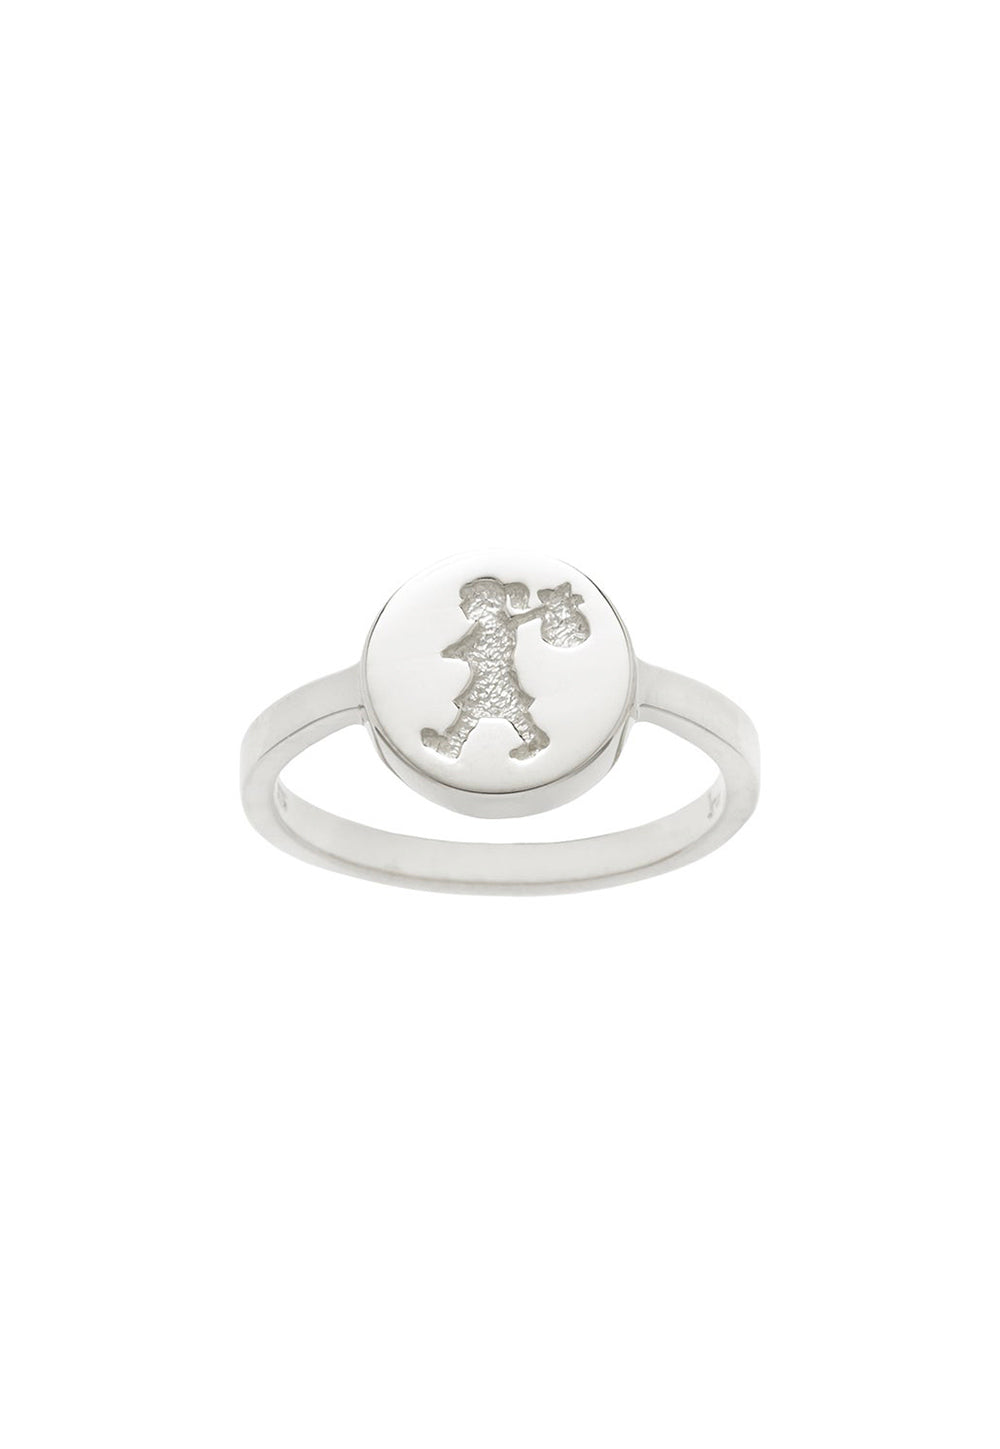 Runaway Stamp Ring sold by Angel Divine